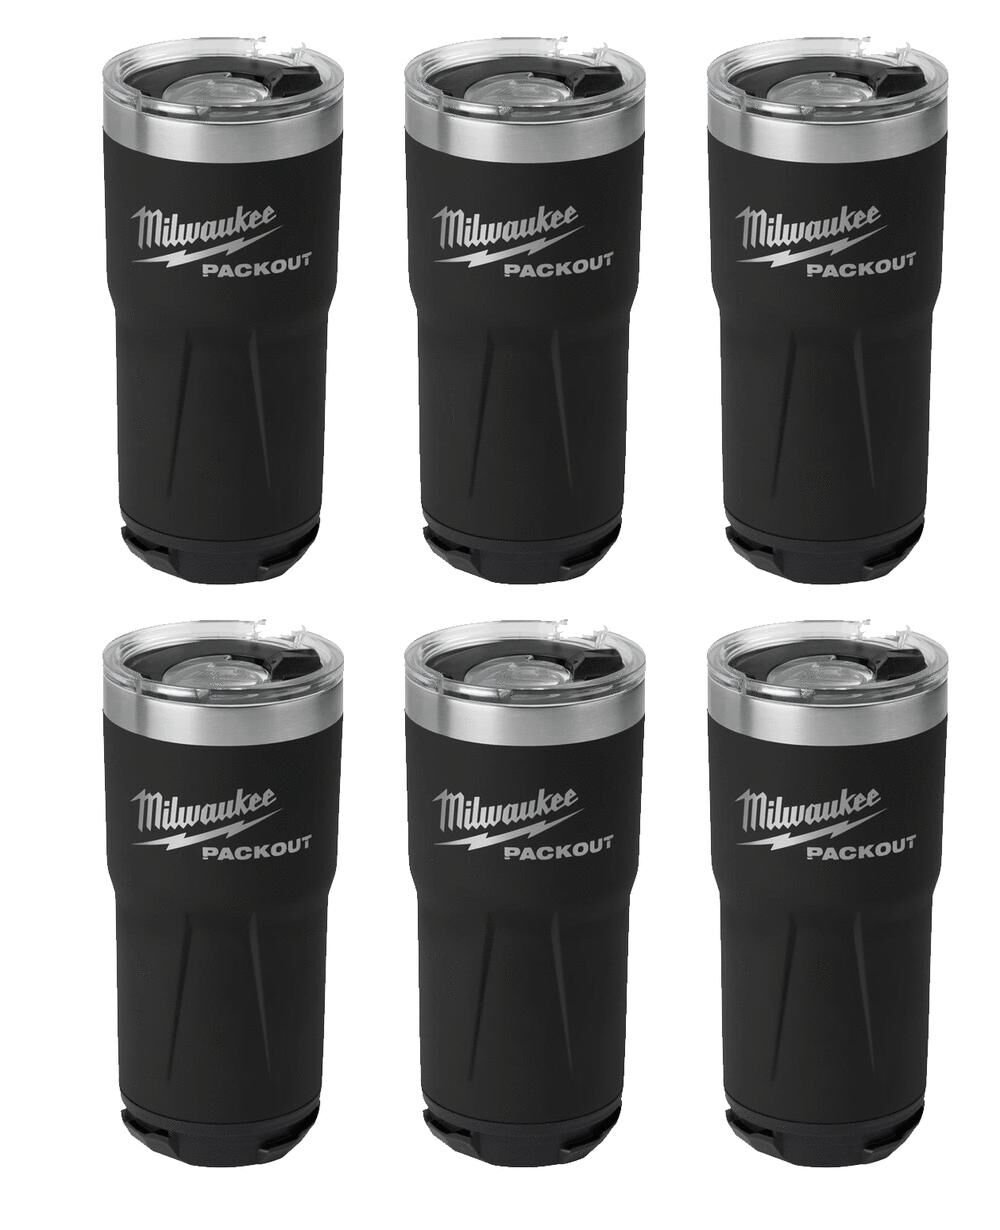 NEW Milwaukee PACKOUT Black Tumblers! 